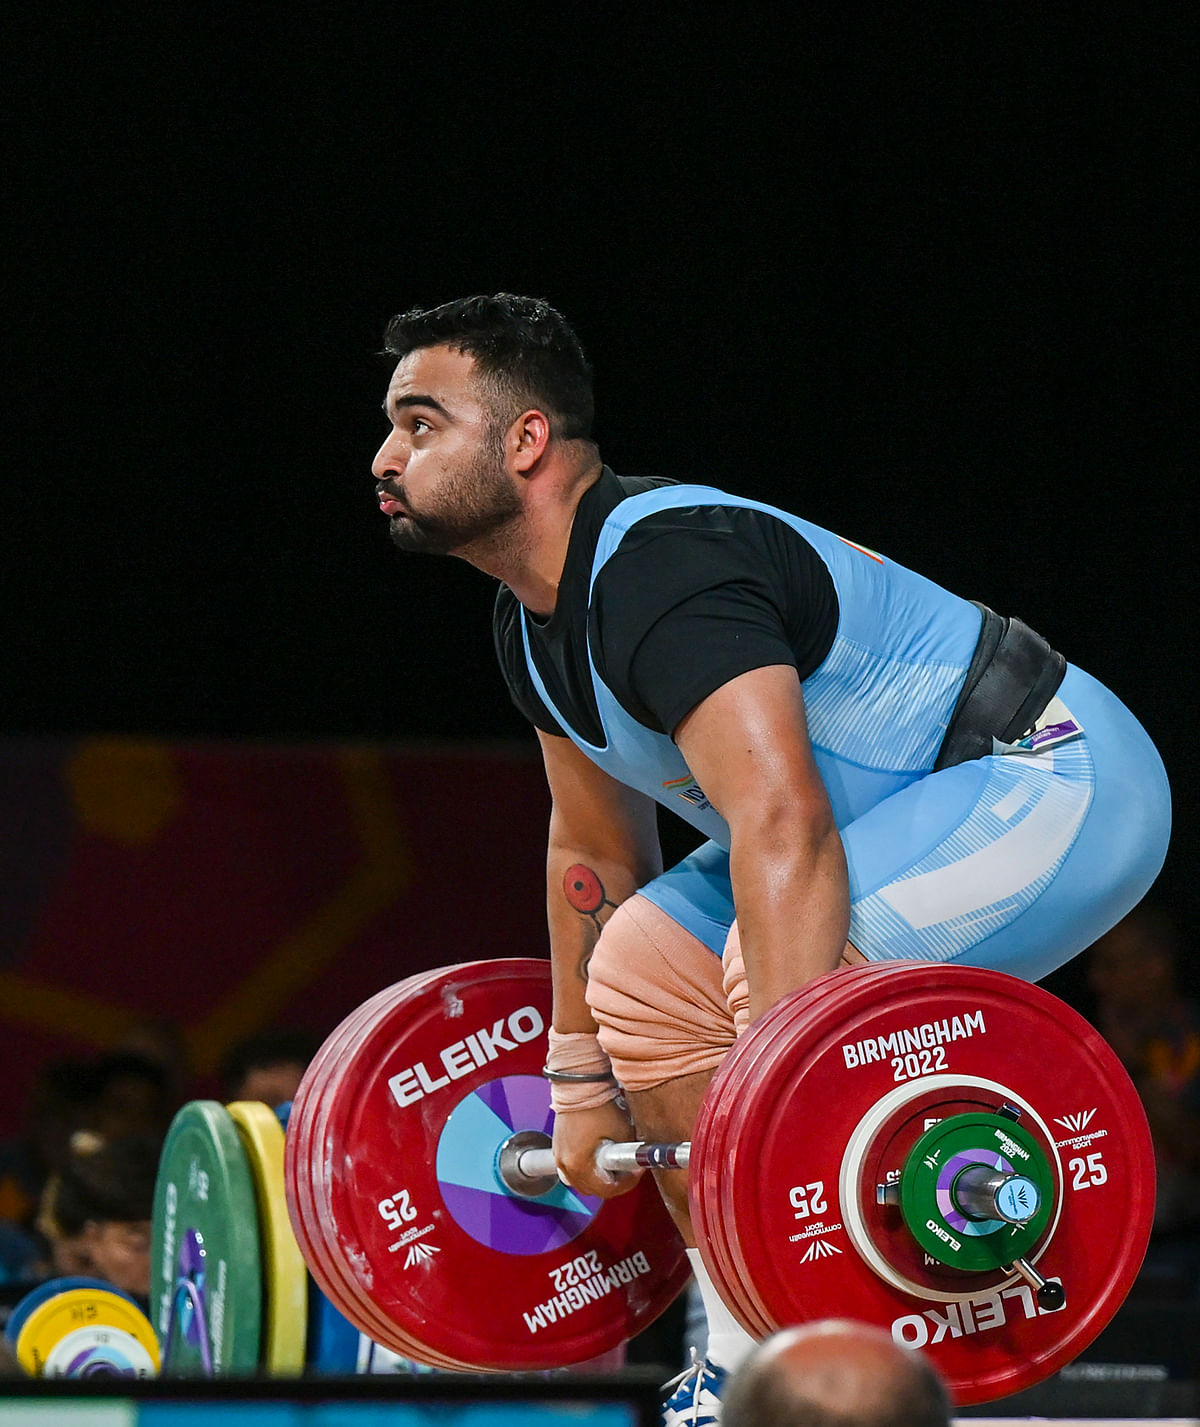 Lovepreet Singh has bagged a bronze in weightlifting at the 2022 Commonwealth Games.